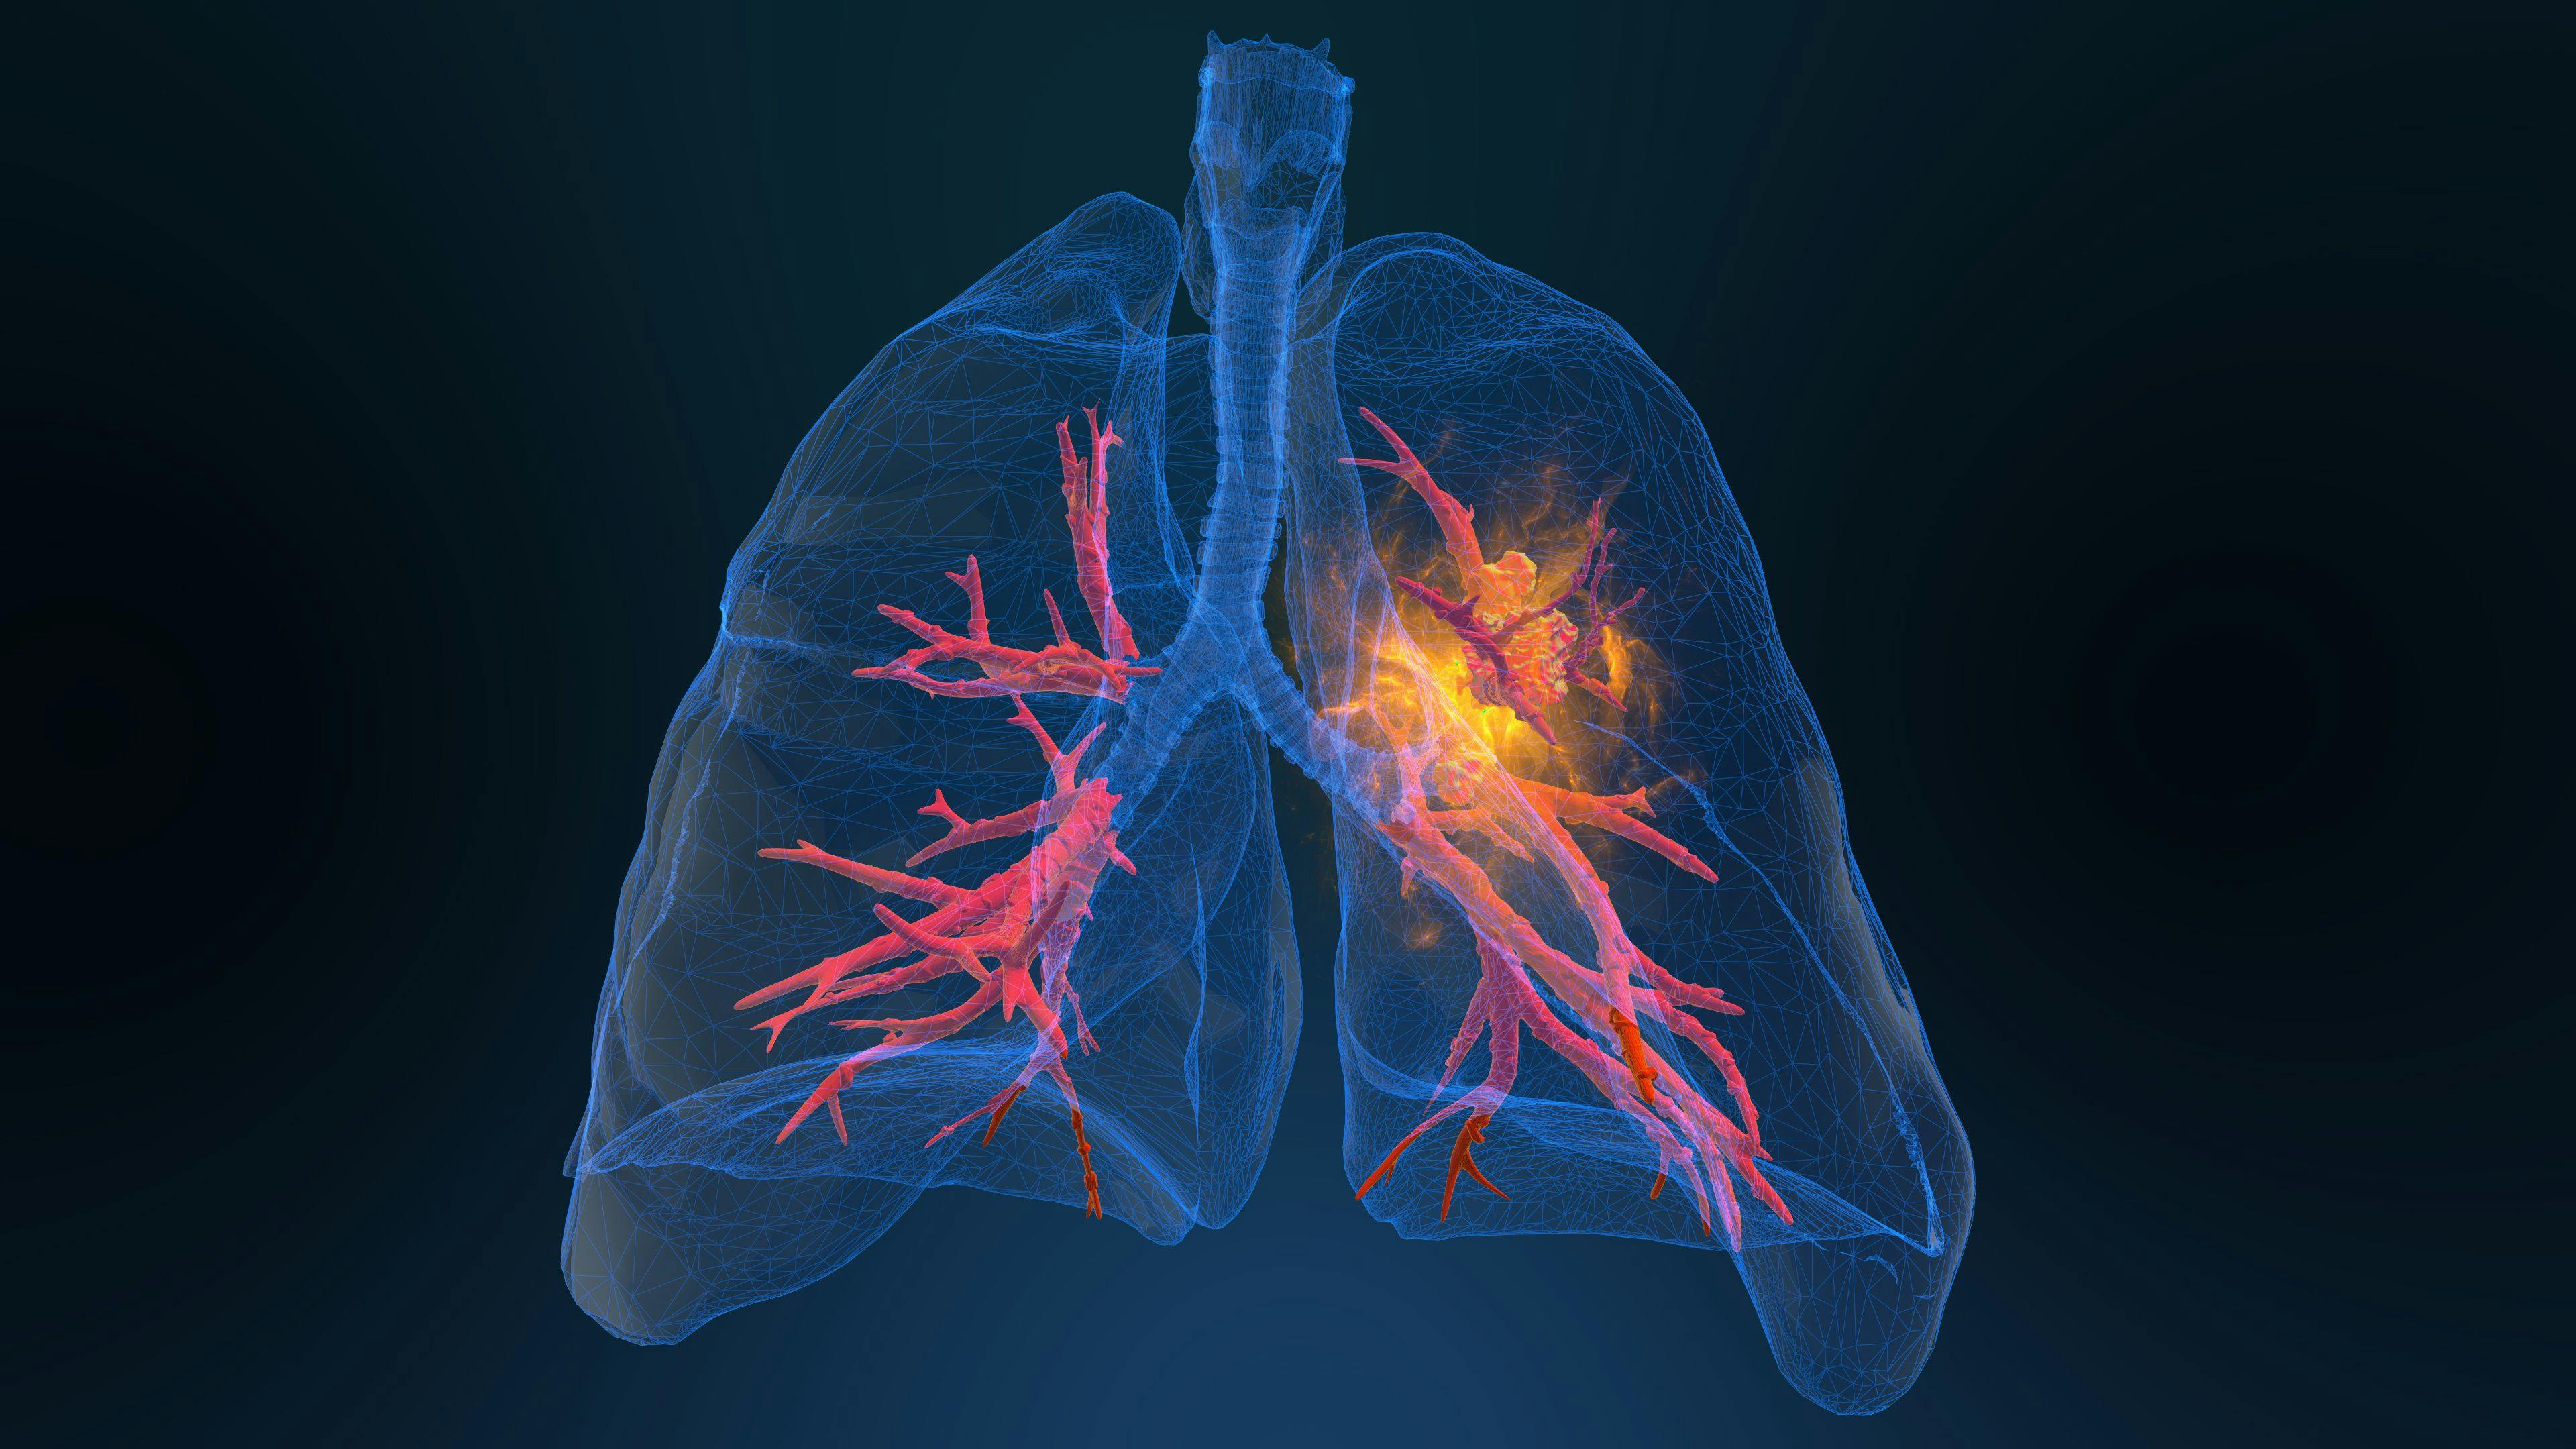 Phase 3 Trials Demonstrate Efficacy of Immune Checkpoint Inhibitors for Lung Cancer in Older Adults